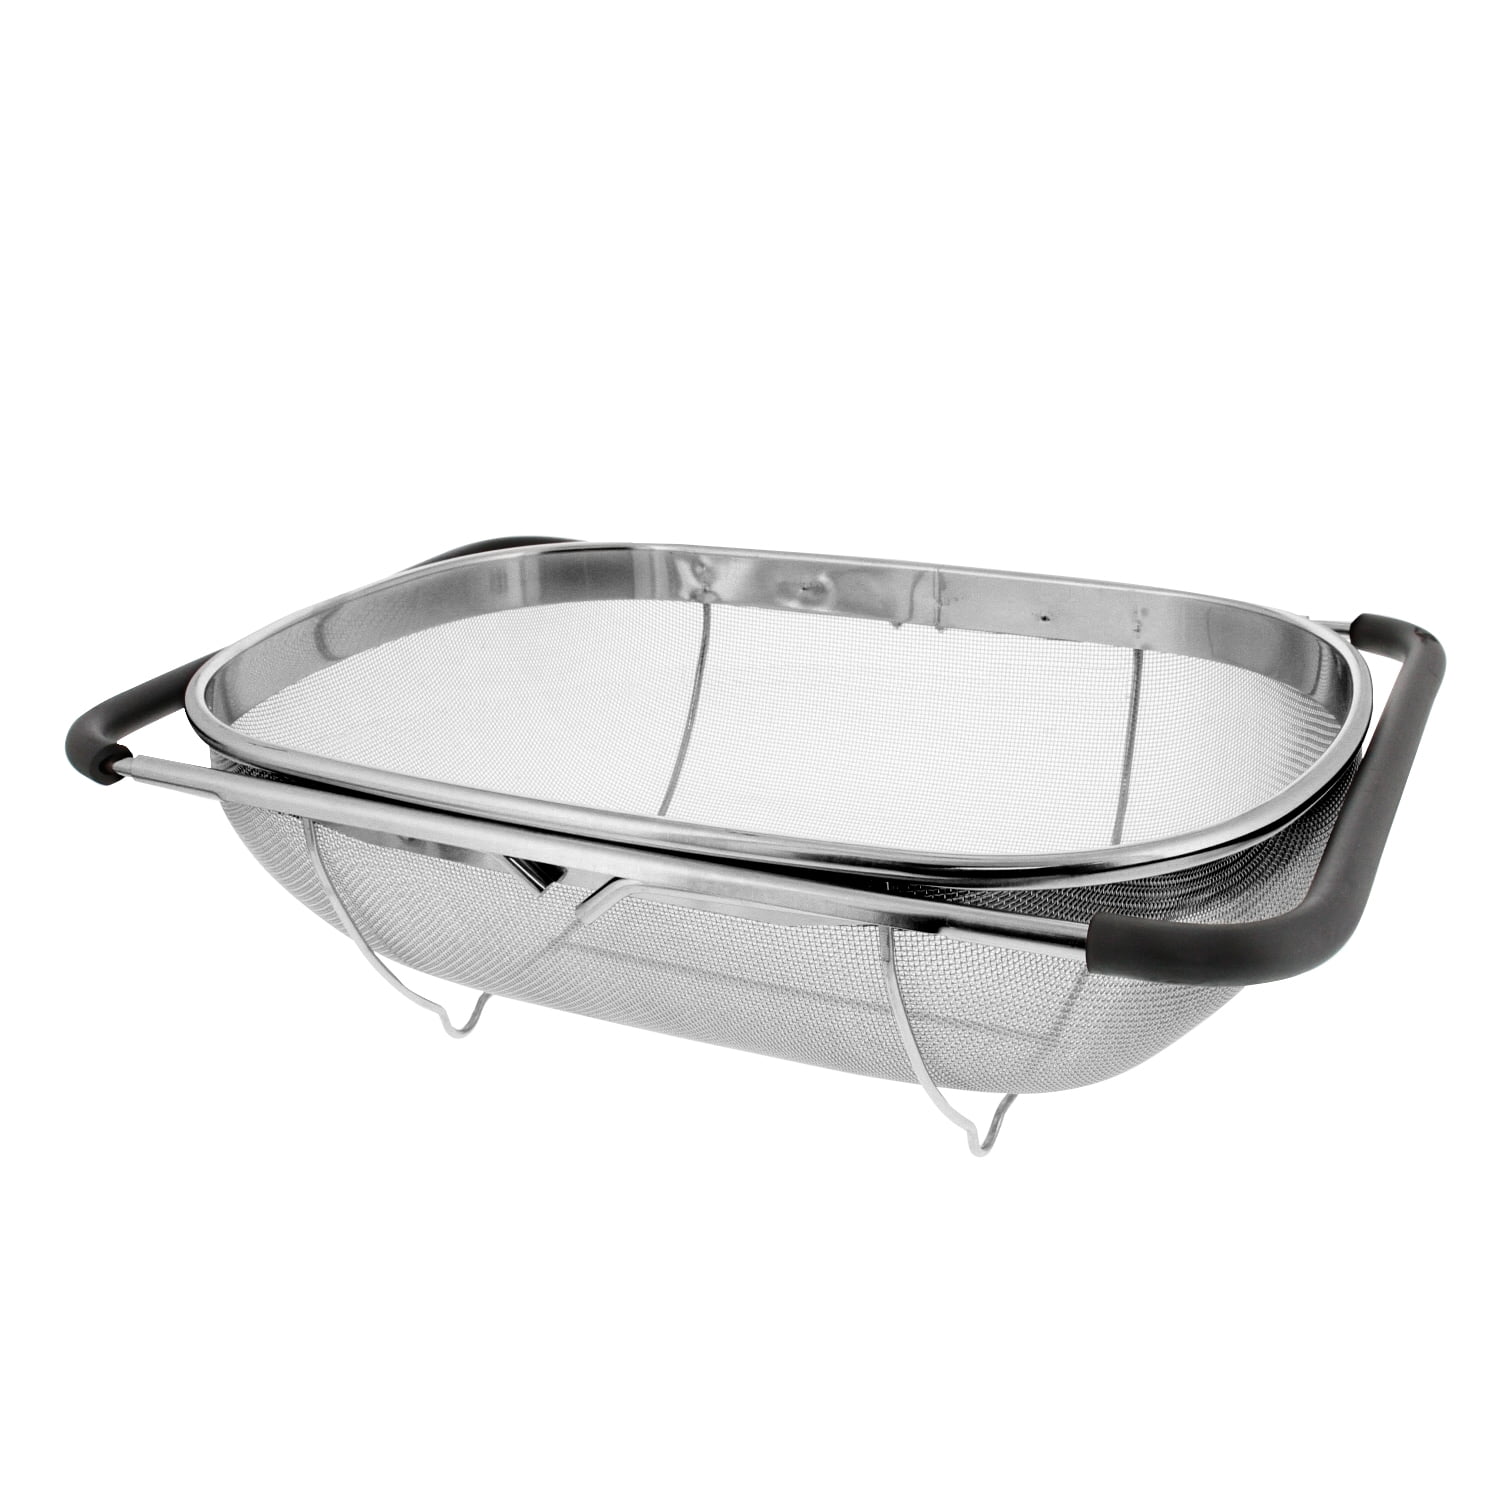 KitchenAid Stainless Steel Expandable Over The Sink Colander with Rubber/Silicone Black Accents, Size: Chef